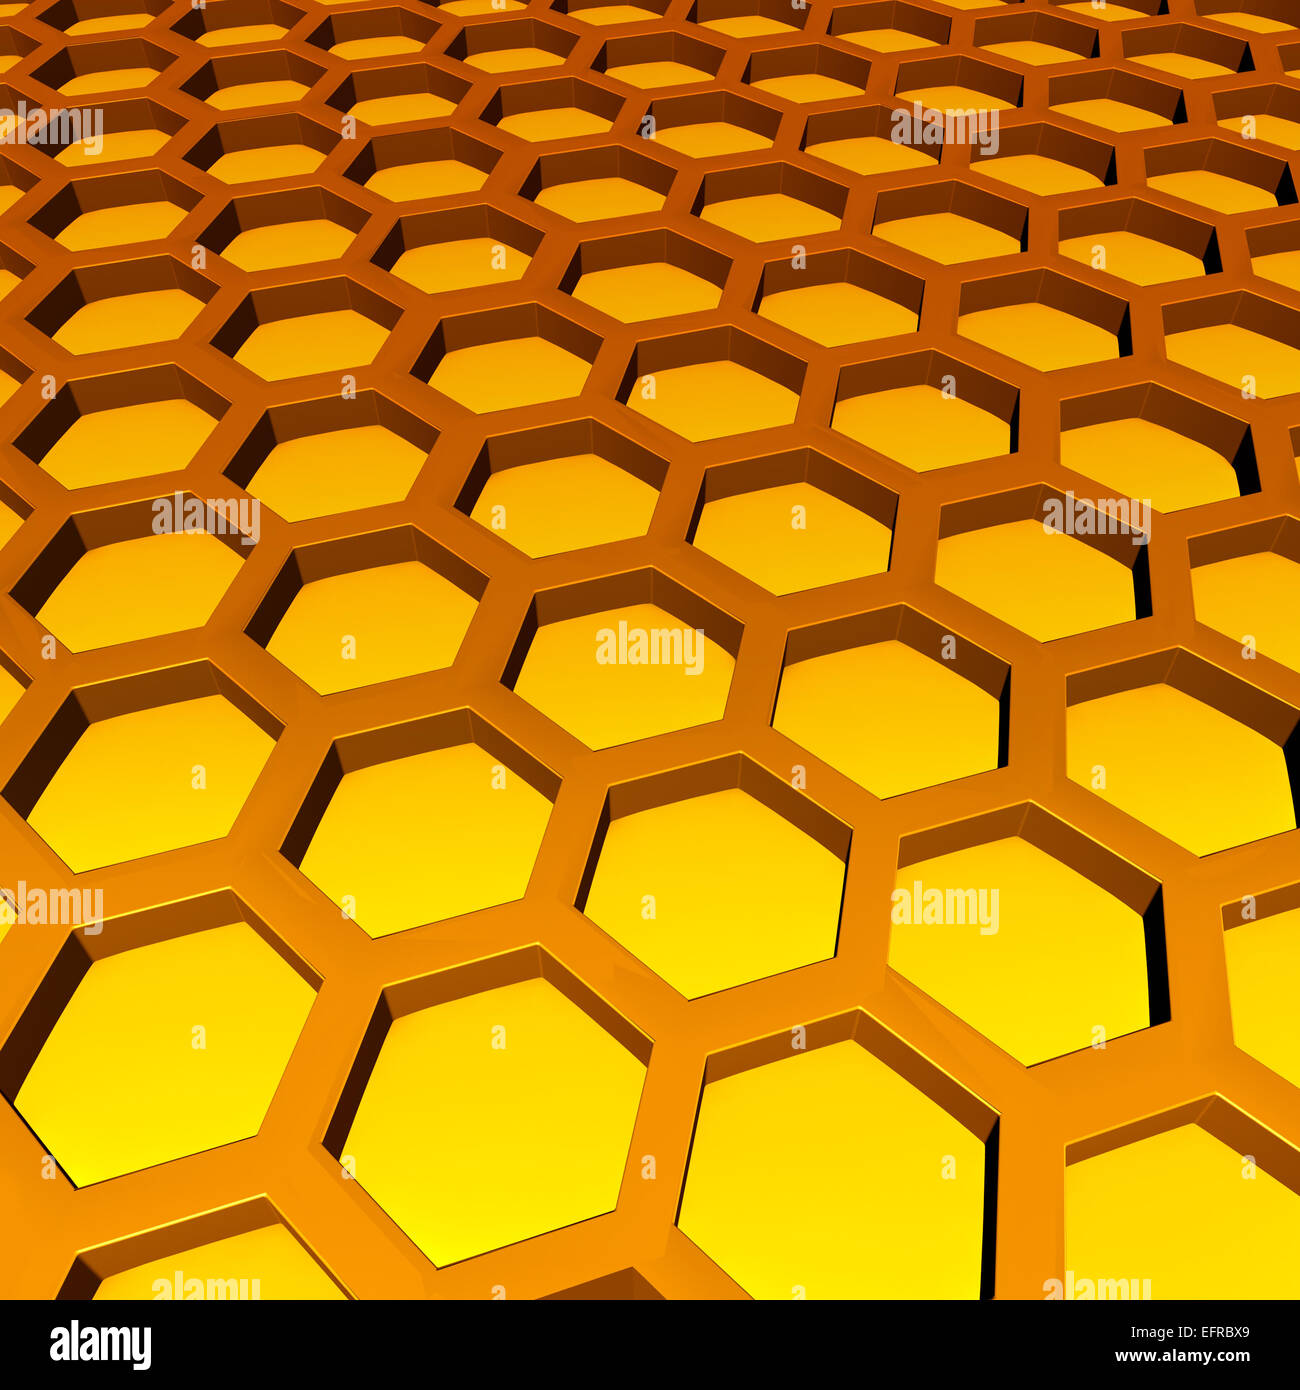 Honeycomb pattern as geometric three dimensional hexagon cell shapes with sweet honey inside as a symbol for golden food or business network connection symbol. Stock Photo